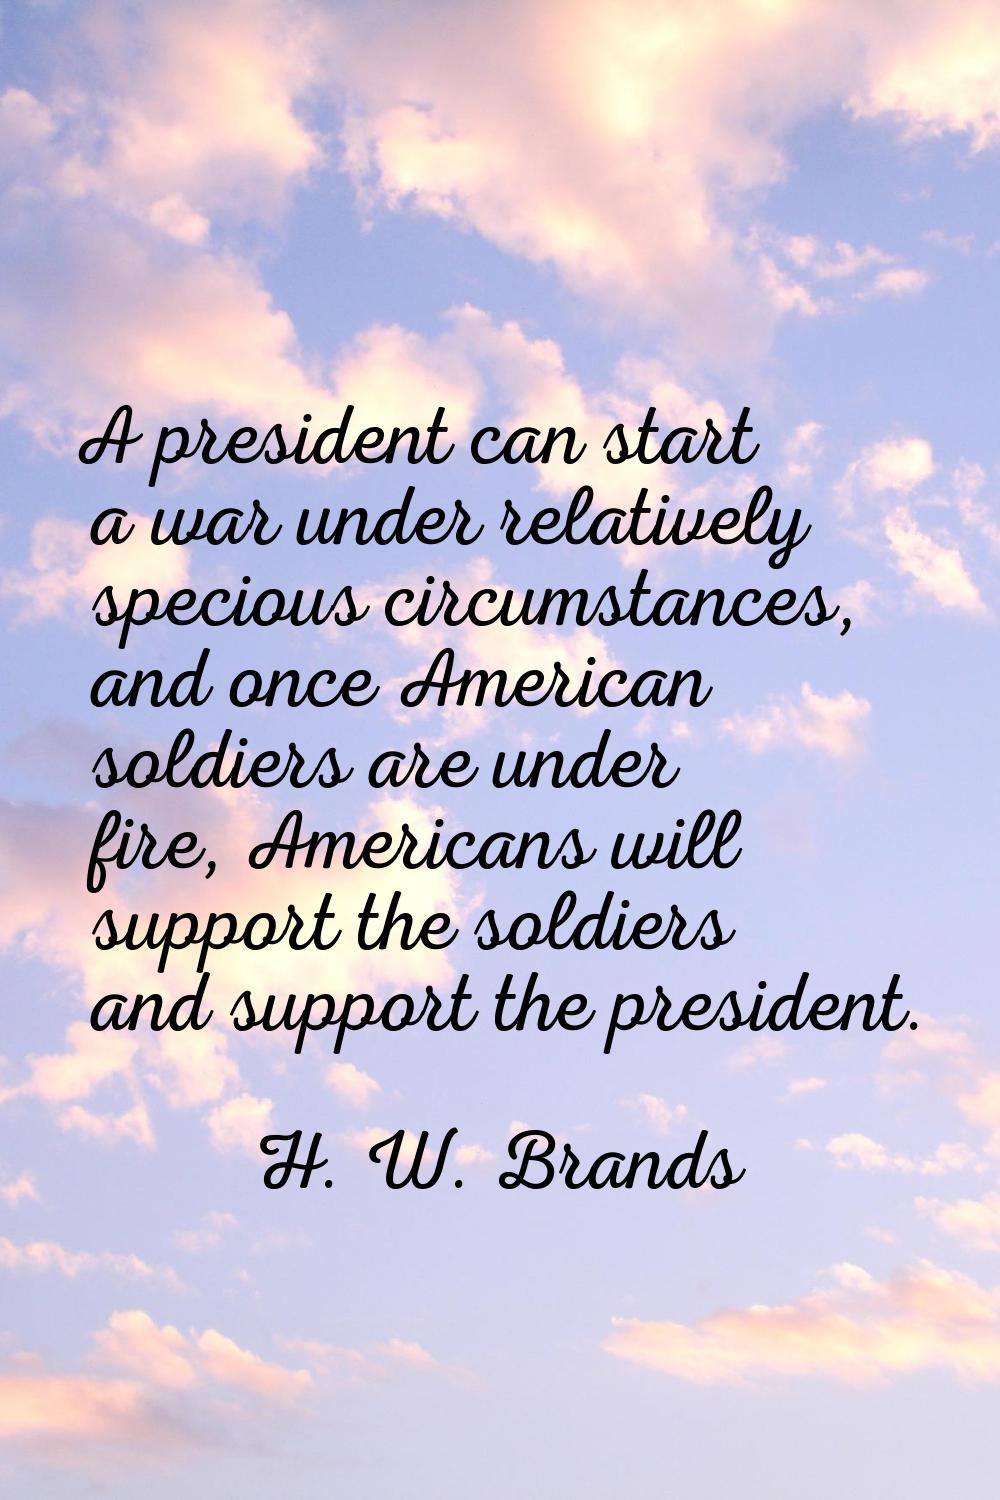 A president can start a war under relatively specious circumstances, and once American soldiers are